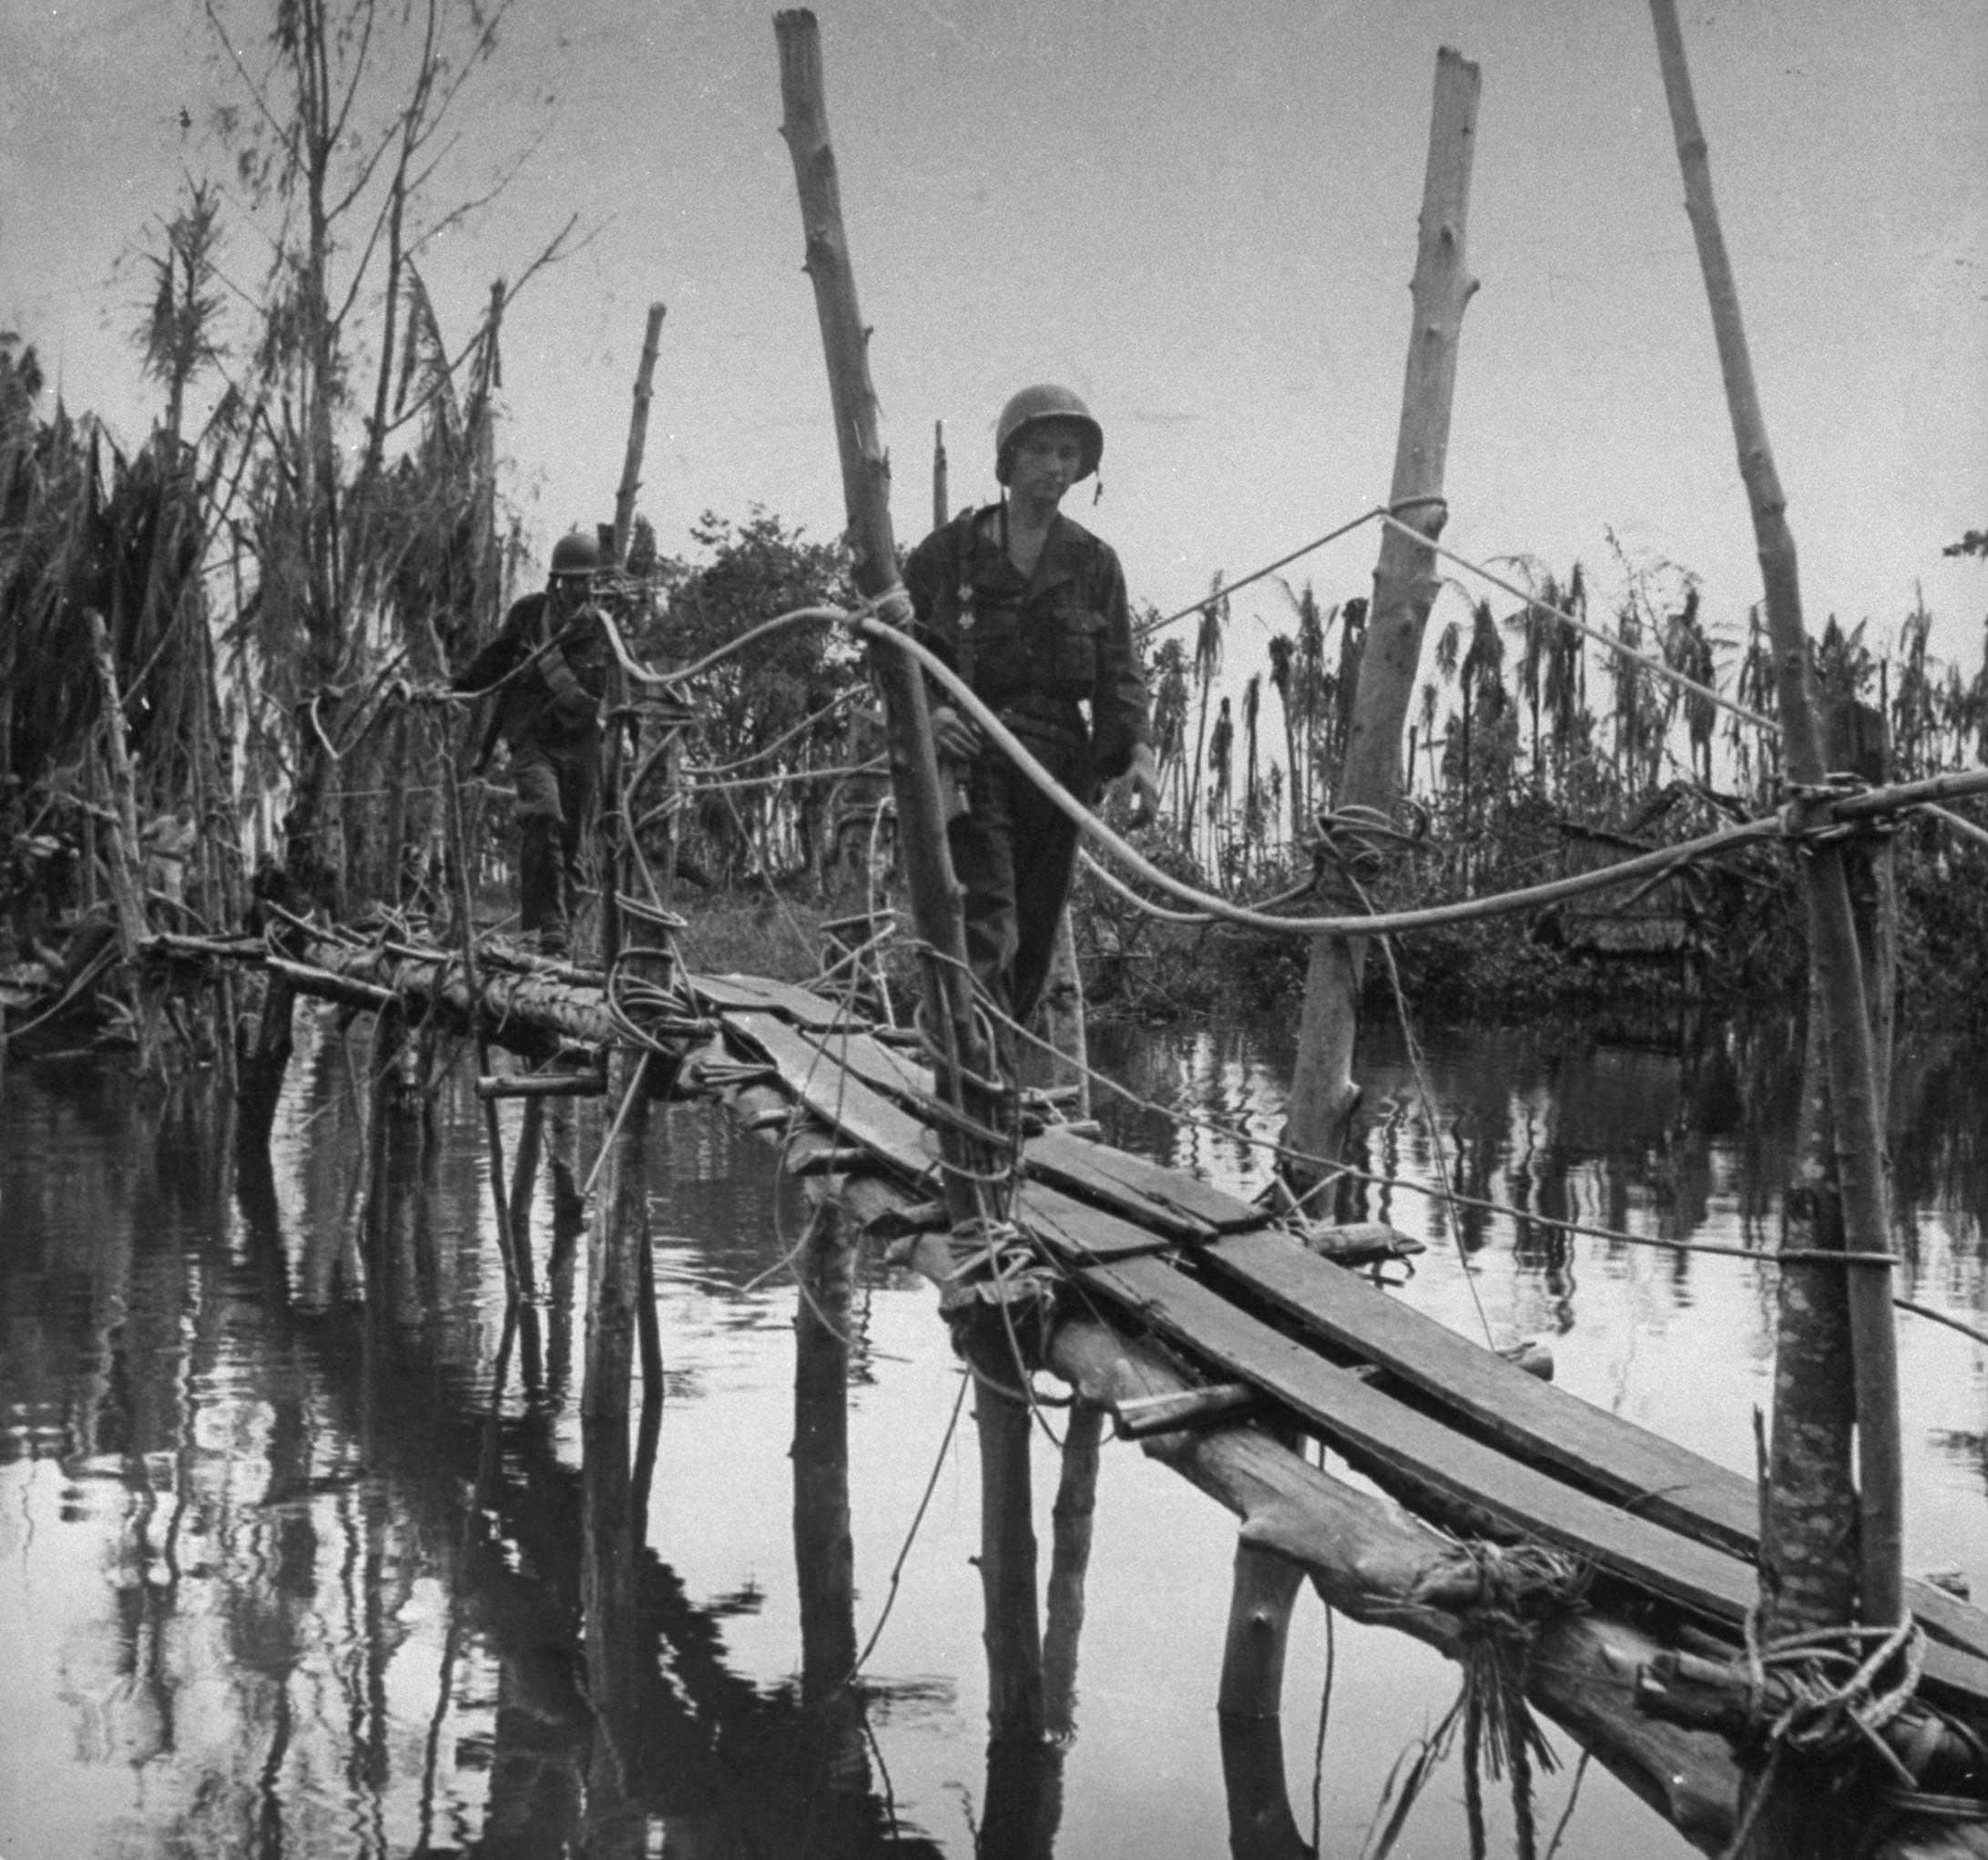 "Over Jap-built bridge walk Americans on patrol. It connects Entrance Creek Island with Buna Mission and one end of it was blown by Japs. Americans repaired it."